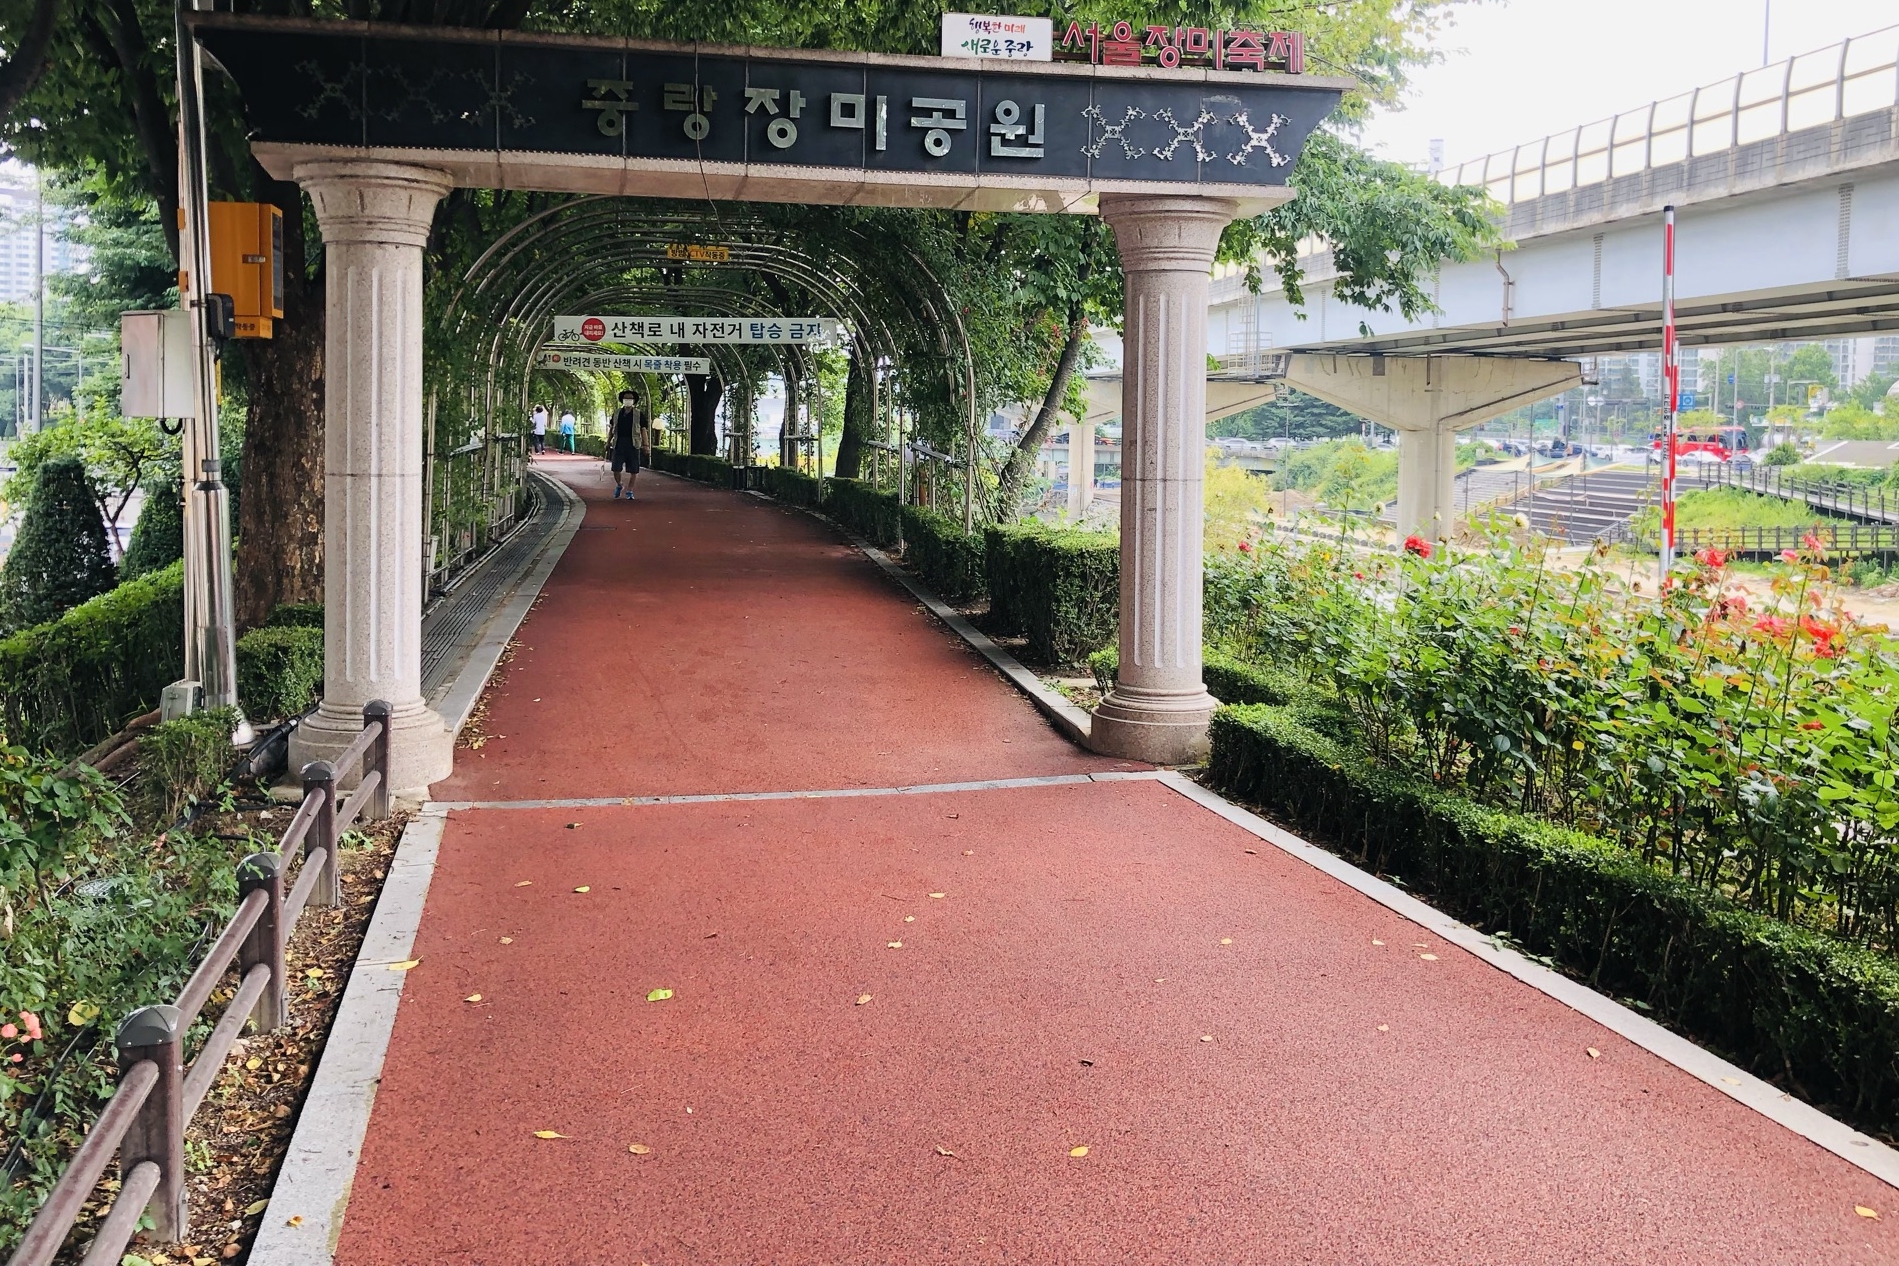 Entryway and Main entrance0 : Entryway to Seoul Rose Park (Jungnang Rose Park) 4